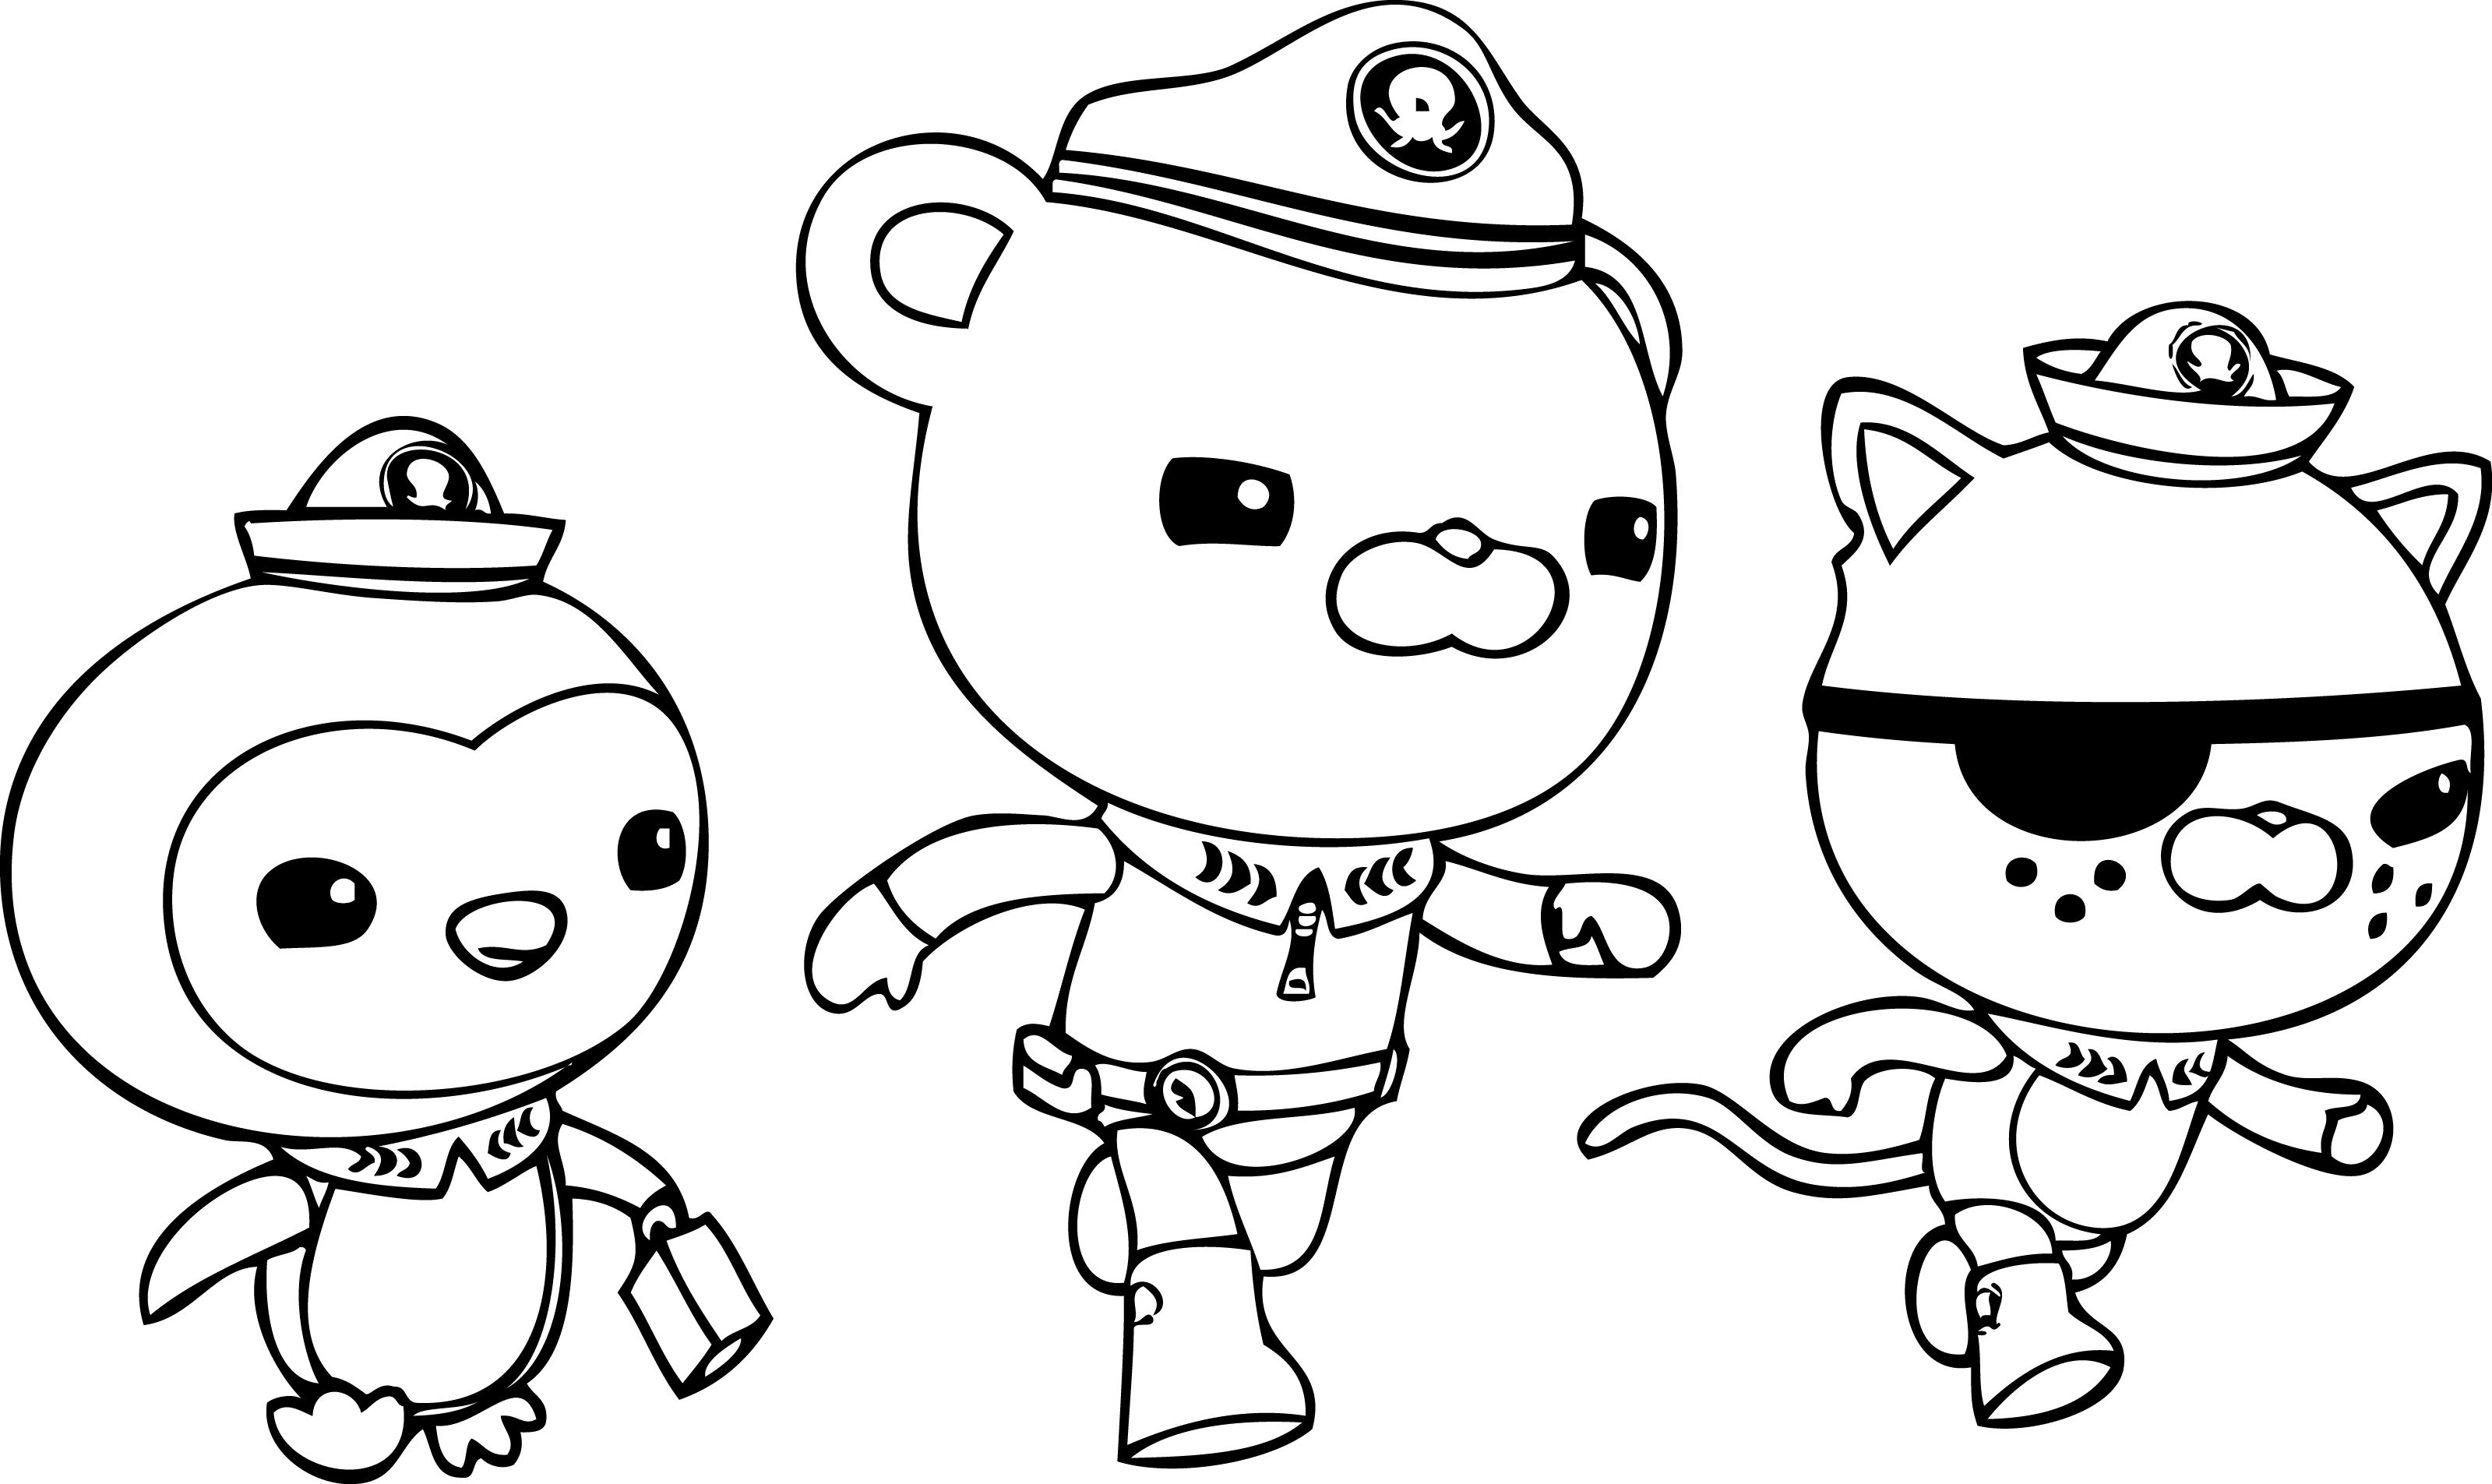 Octonauts Coloring Pages Printable Octonauts Coloring Pages Best Coloring Pages For Kids